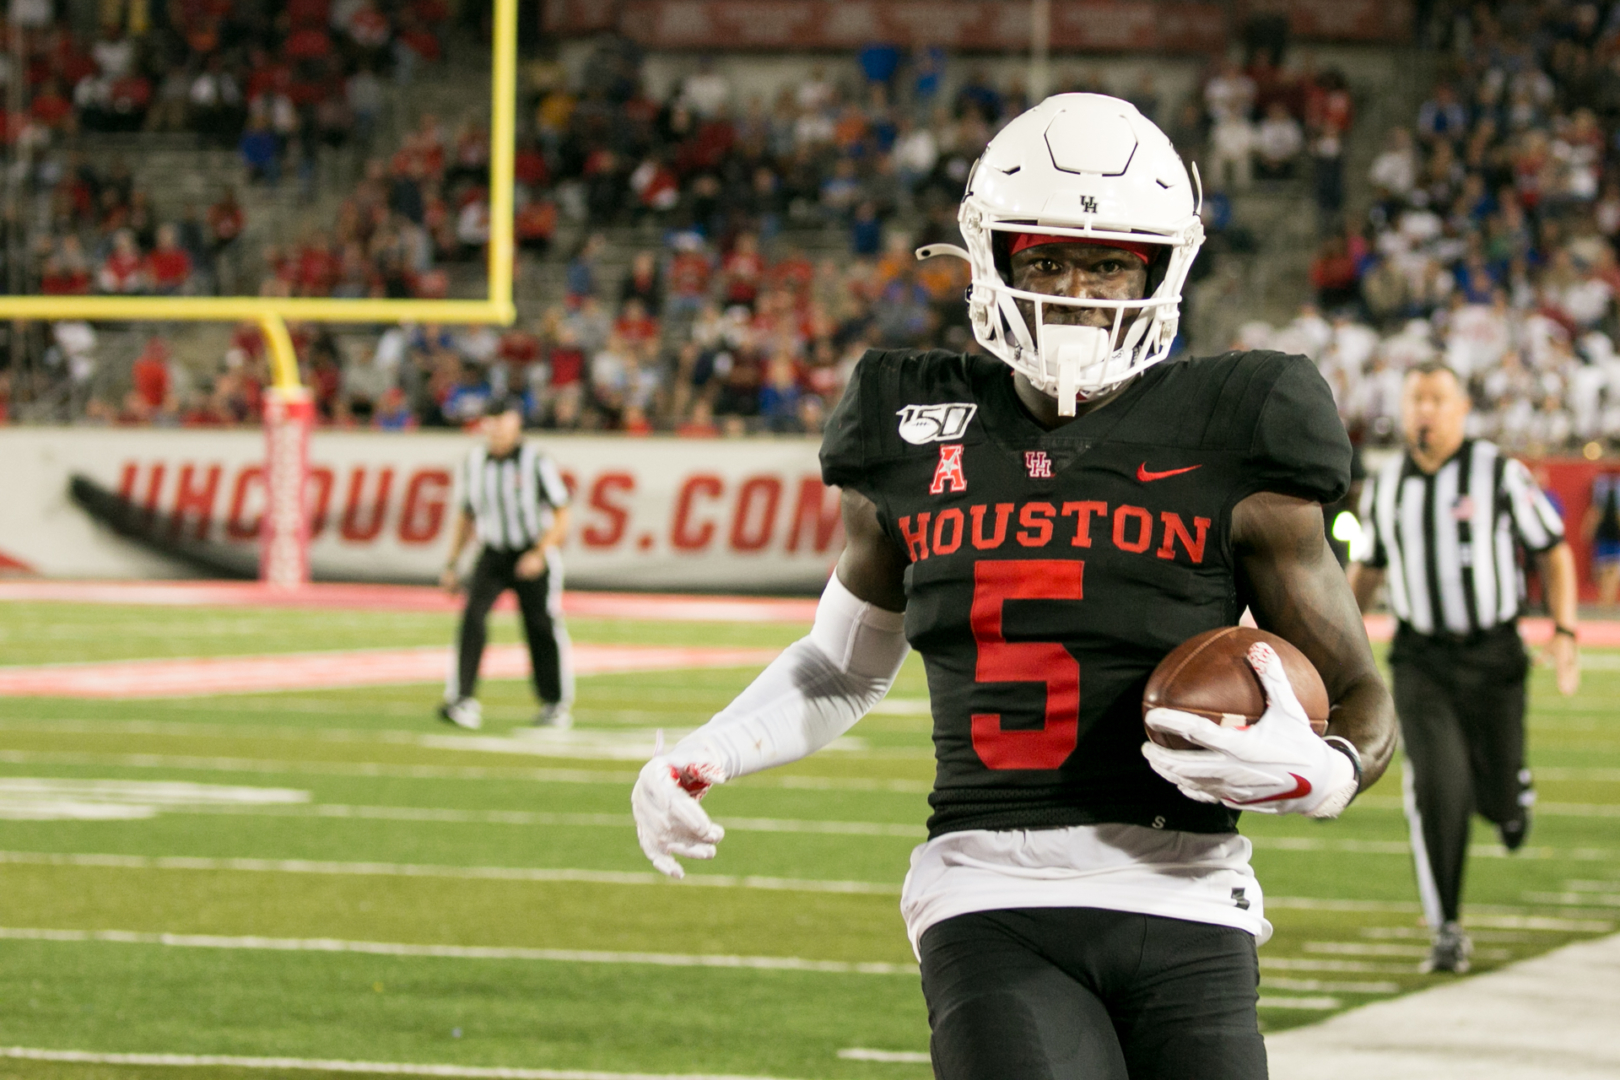 Junior wide receiver Marquez Stevenson caught five passes for 211 yards and two touchdowns against No. 16 SMU, and his services will likely be needed against Saturday night against UCF. | Katrina Martinez/The Cougar